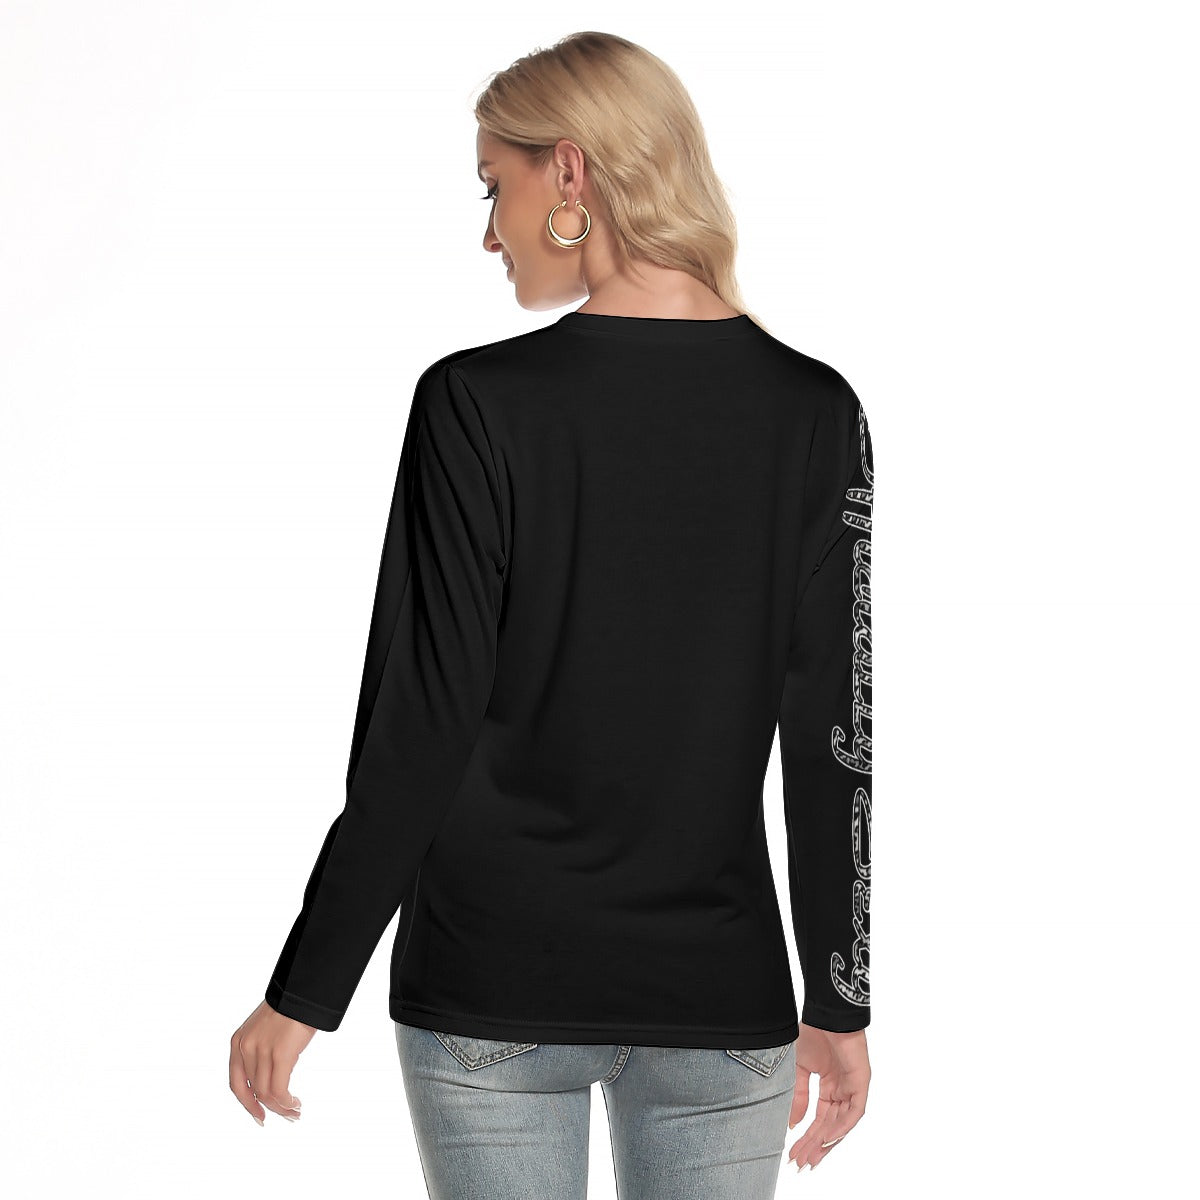 Officially Sexy Snow Leopard Print Collection Women's Black O-neck Long Sleeve T-shirt (English) 3